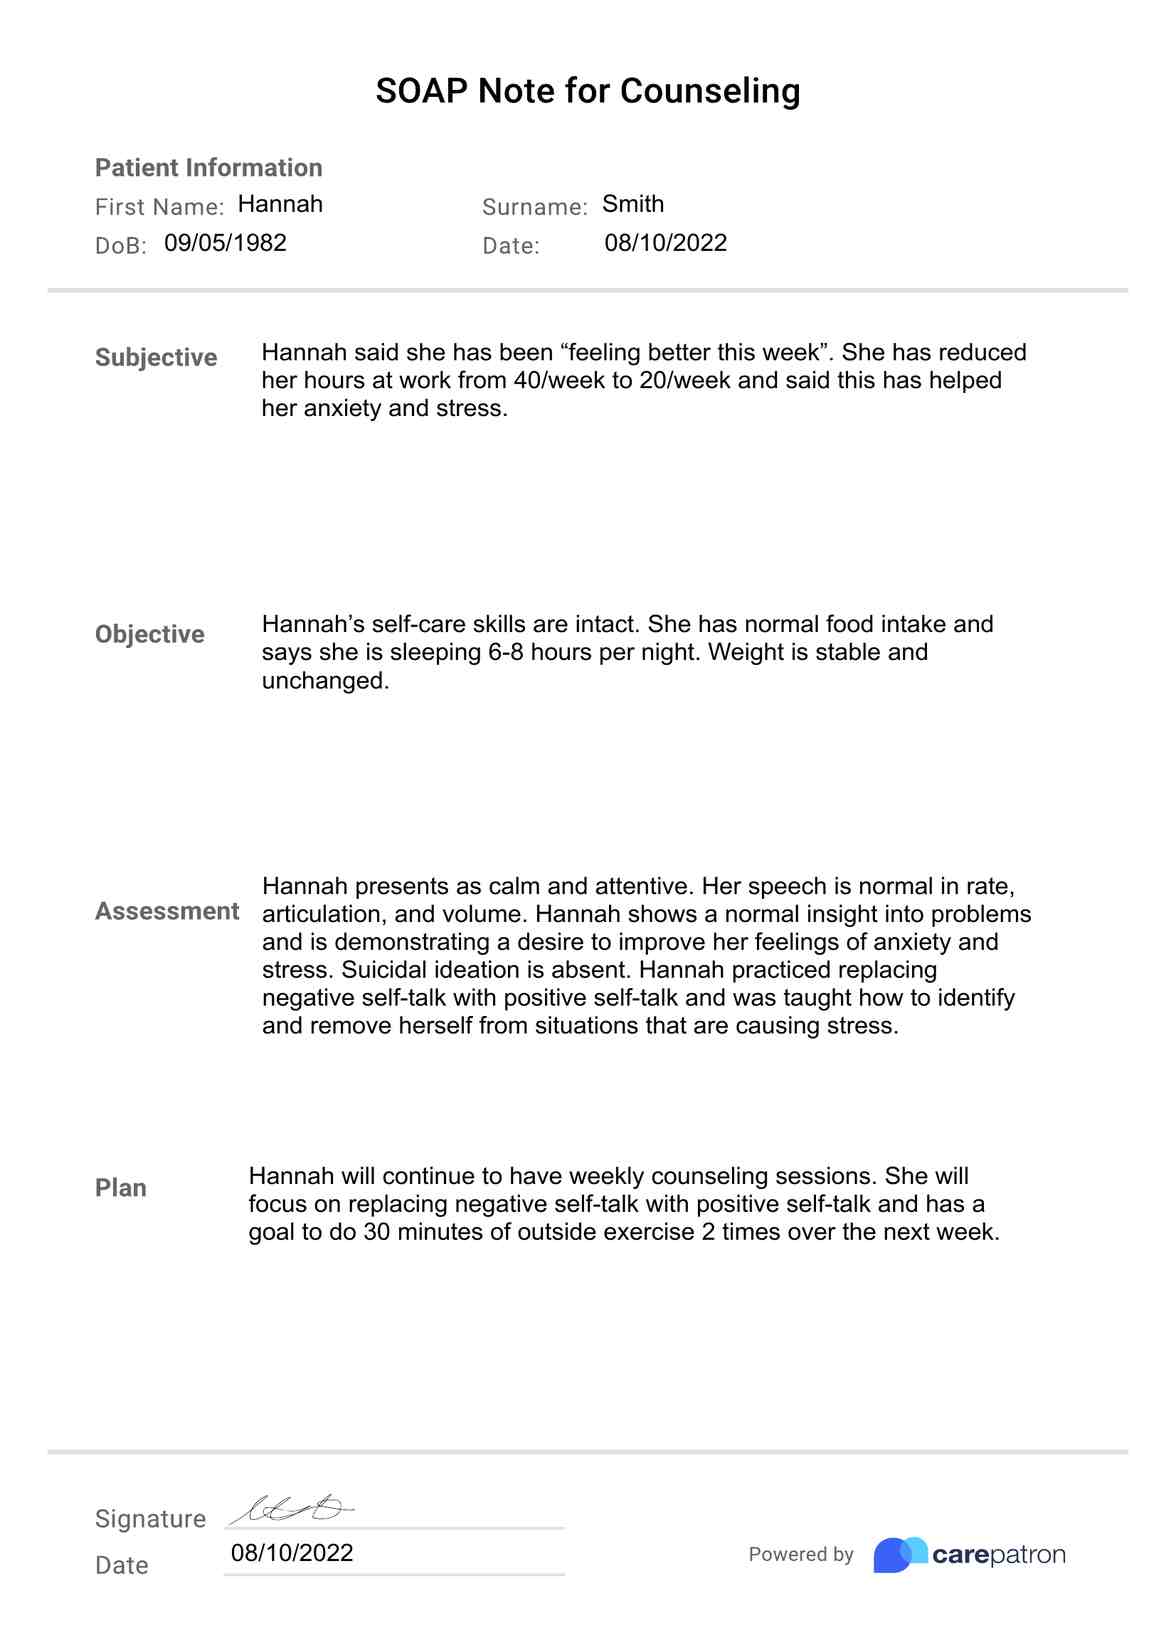 SOAP Notes for Counseling Template PDF Example